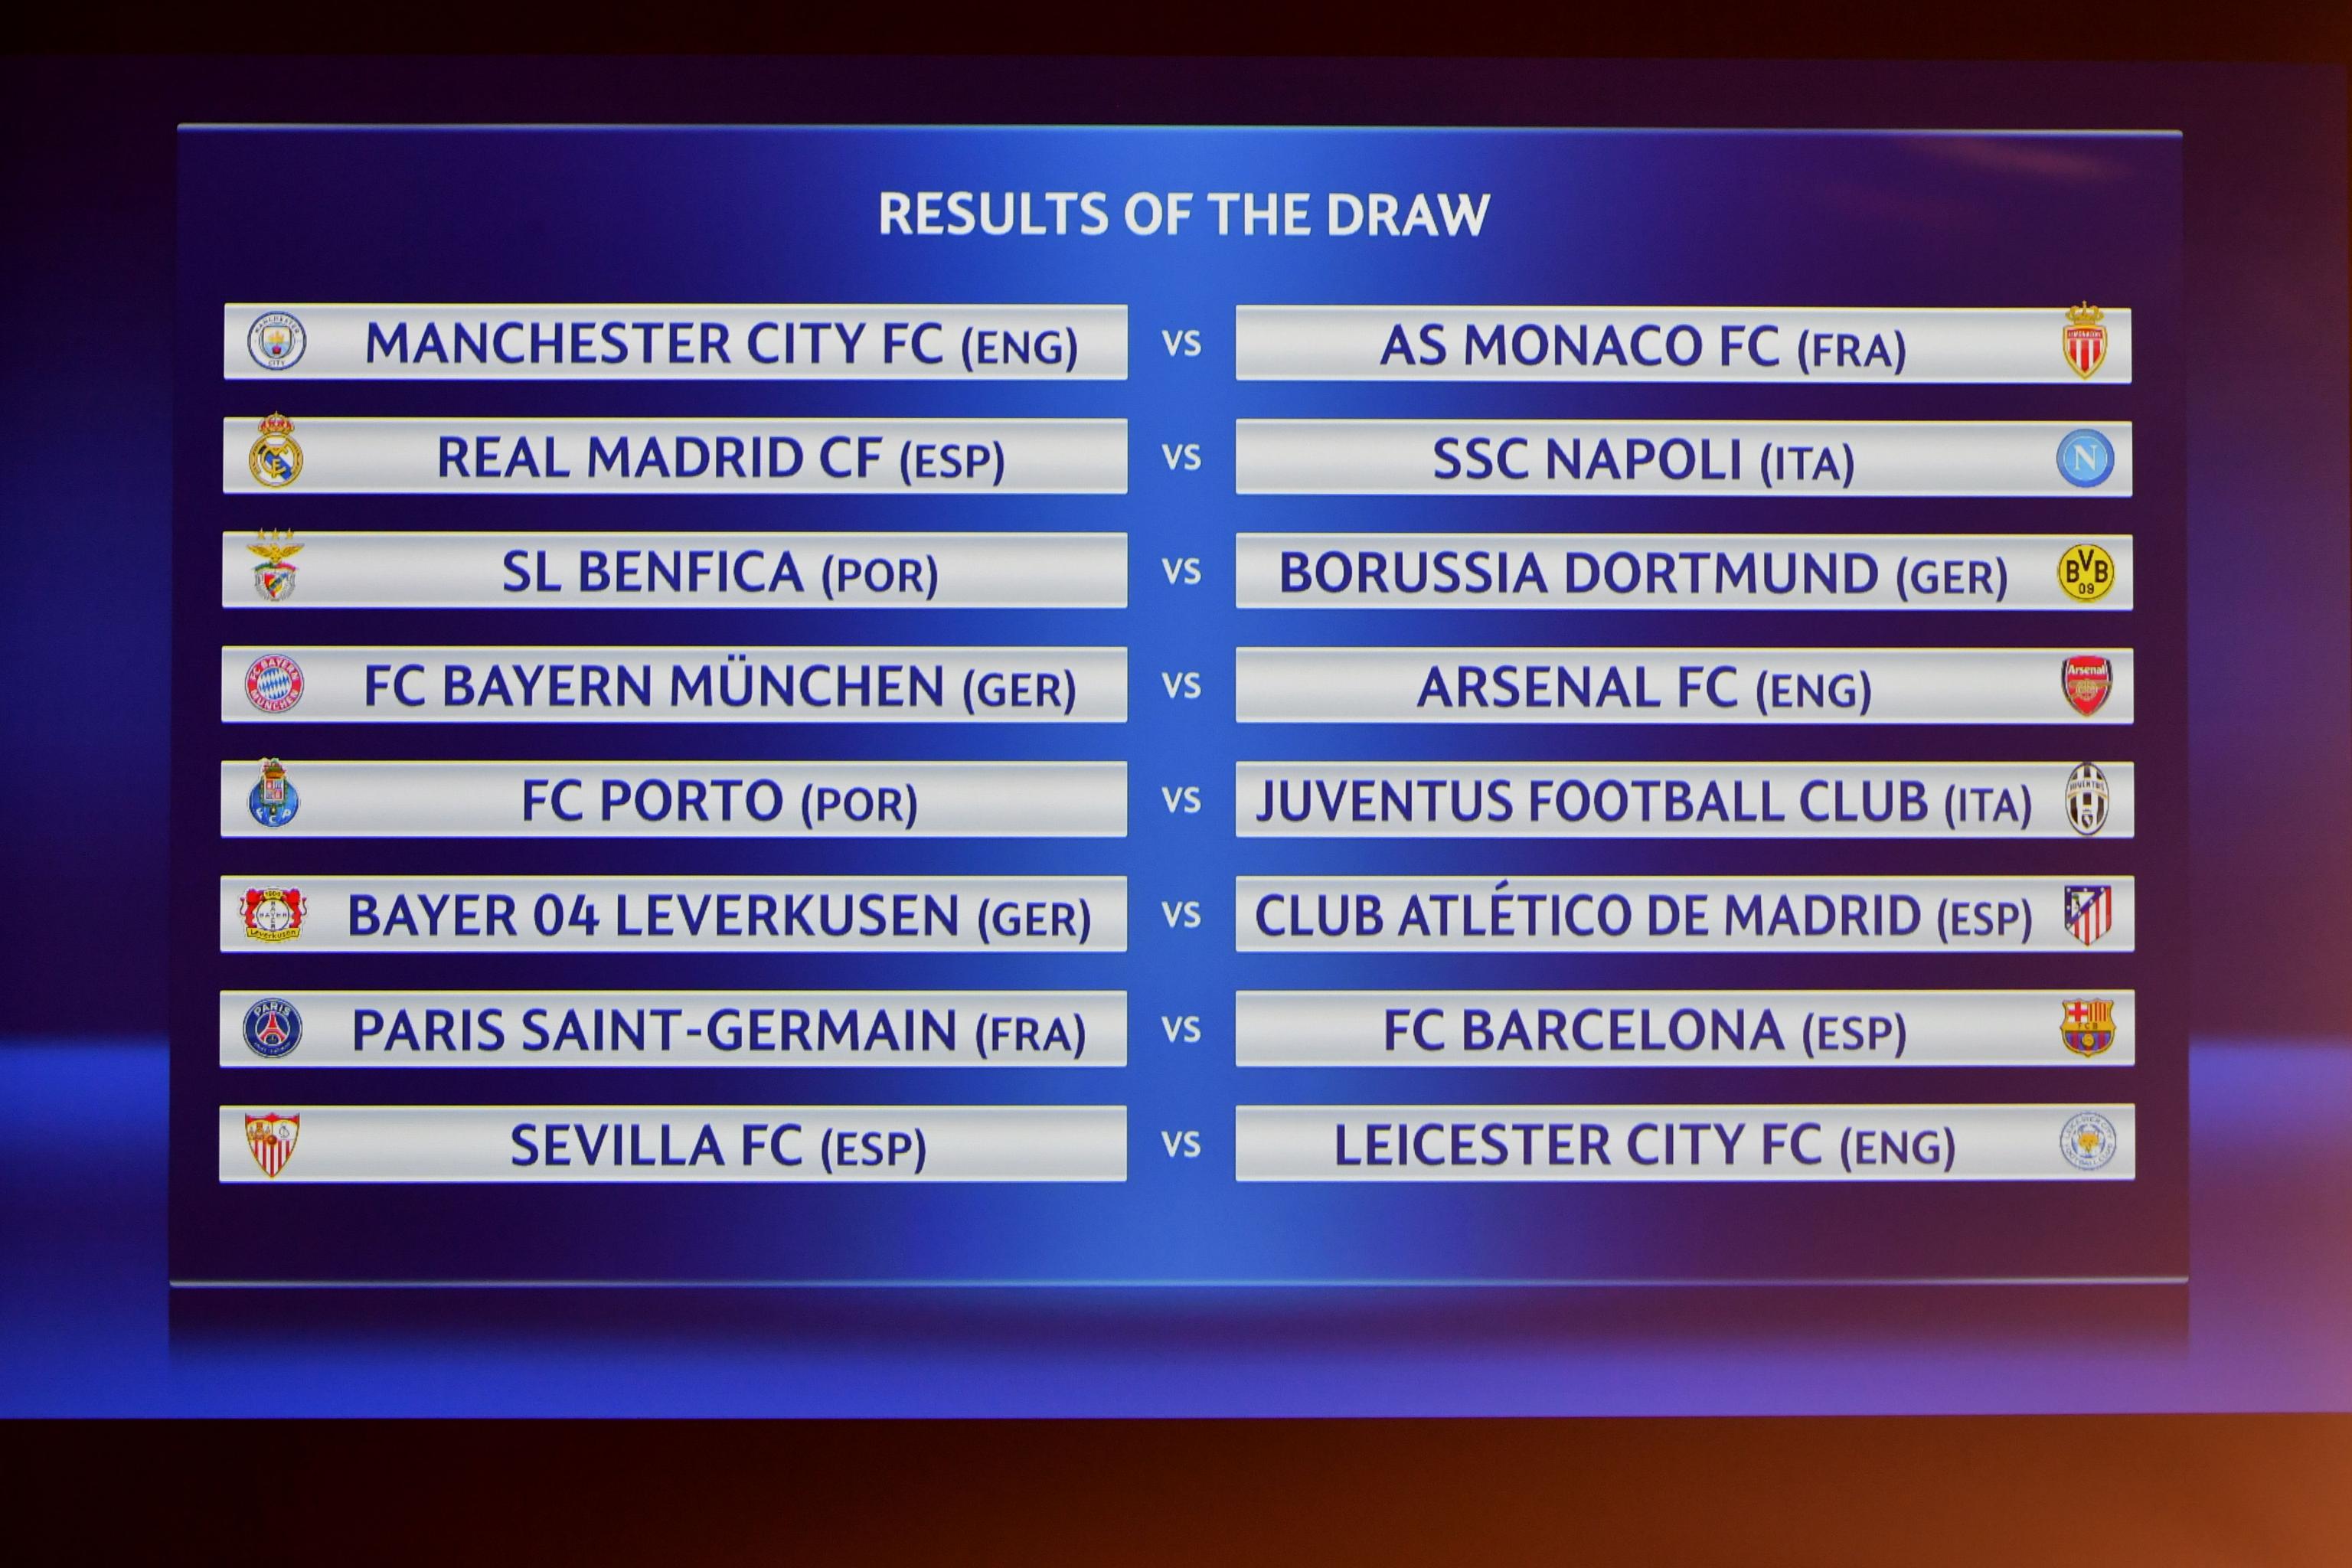 Champions League Draw 2016 17 Round Of 16 Fixture Schedule And Dates Released Bleacher Report Latest News Videos And Highlights